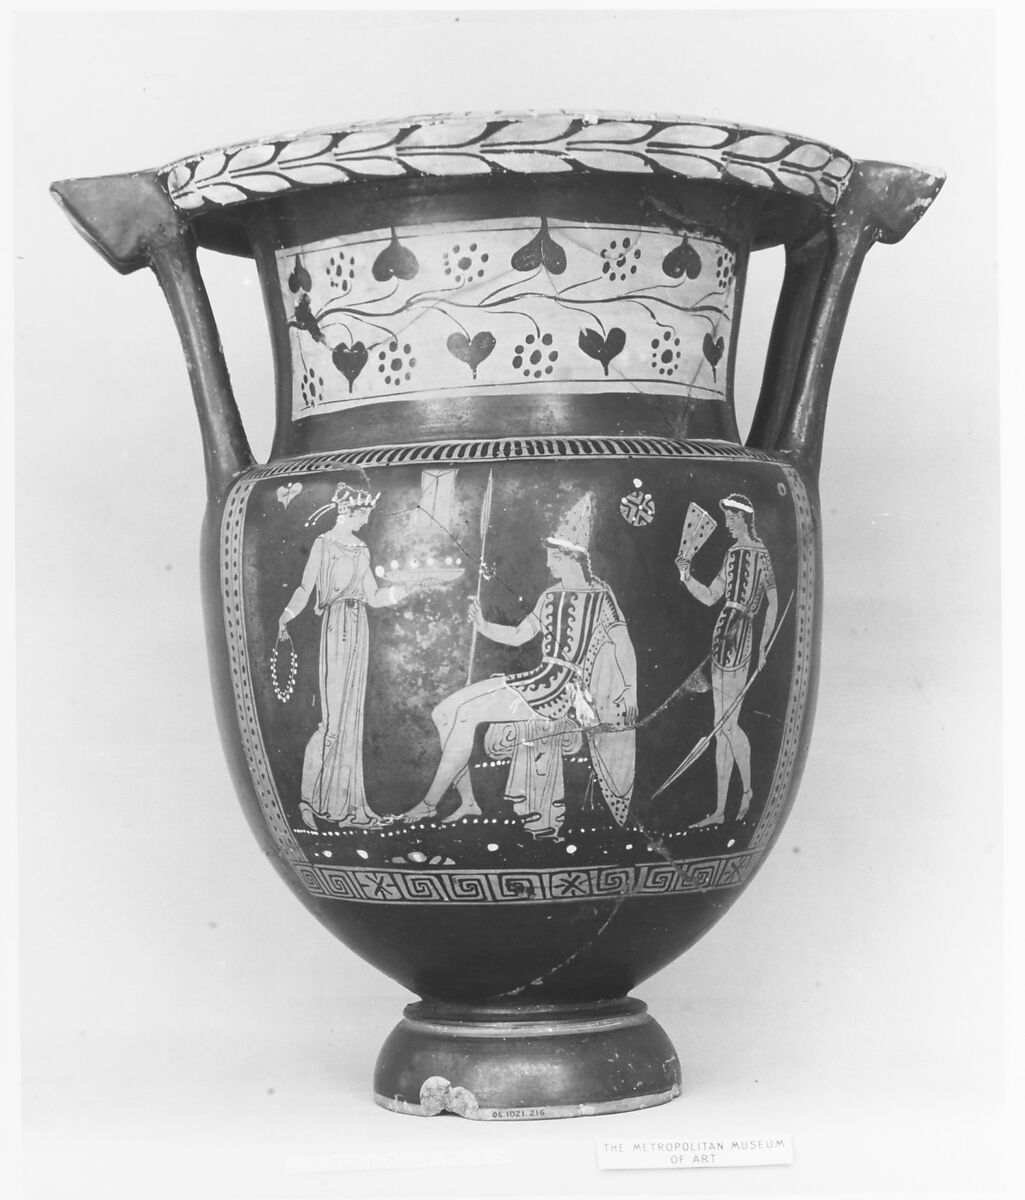 Terracotta column-krater (mixing bowl), Attributed to the Rodin Painter, Terracotta, Greek, South Italian, Apulian 